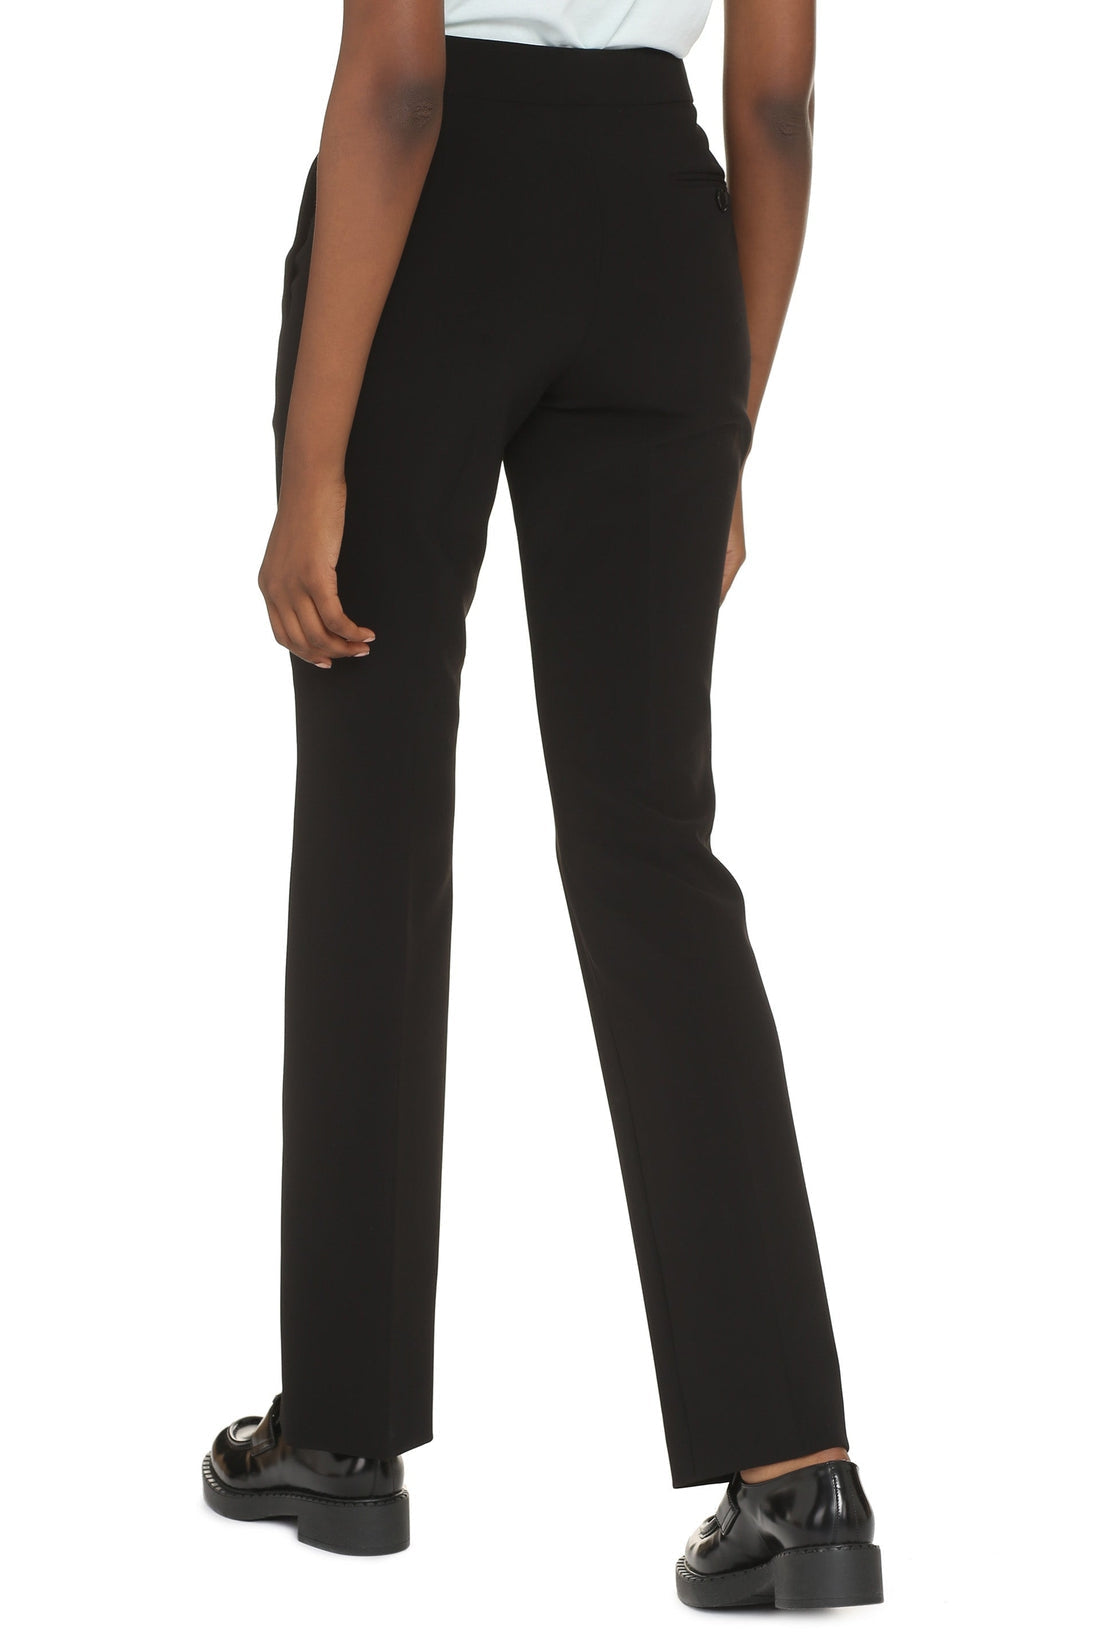 Moschino-OUTLET-SALE-Tailored trousers-ARCHIVIST